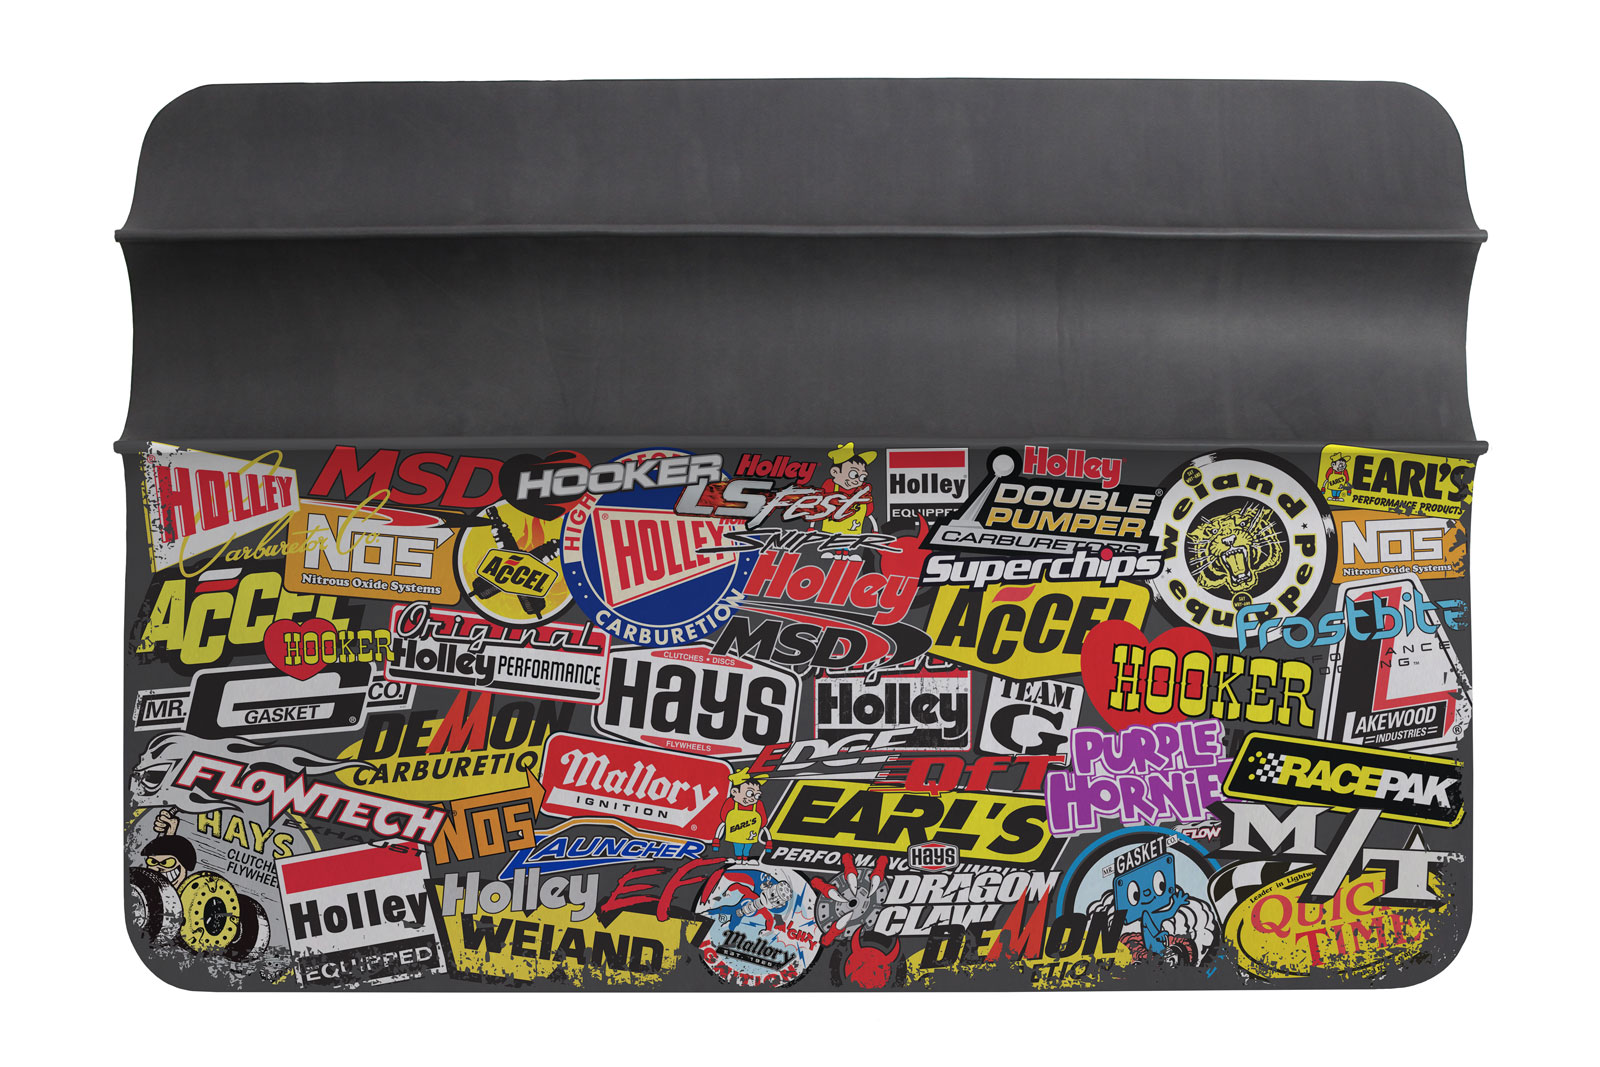 Show details for Holley 36445 Sticker Bomb Fender Cover